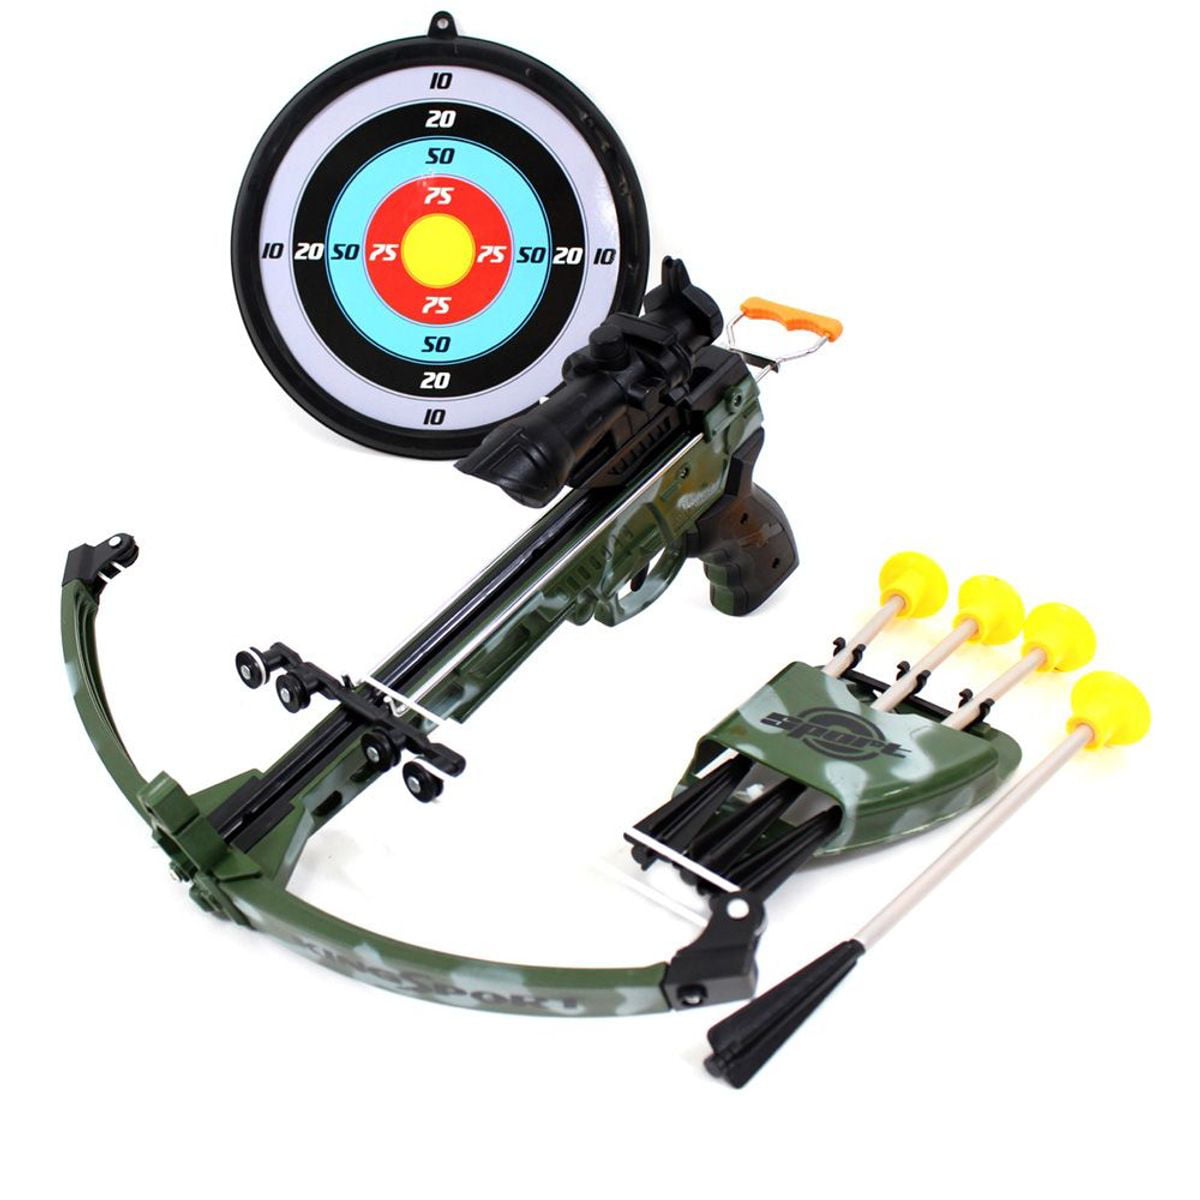 Safe Crossbow Water Play Water Bath Toy Beach Outdoor Boys Favors Toy 